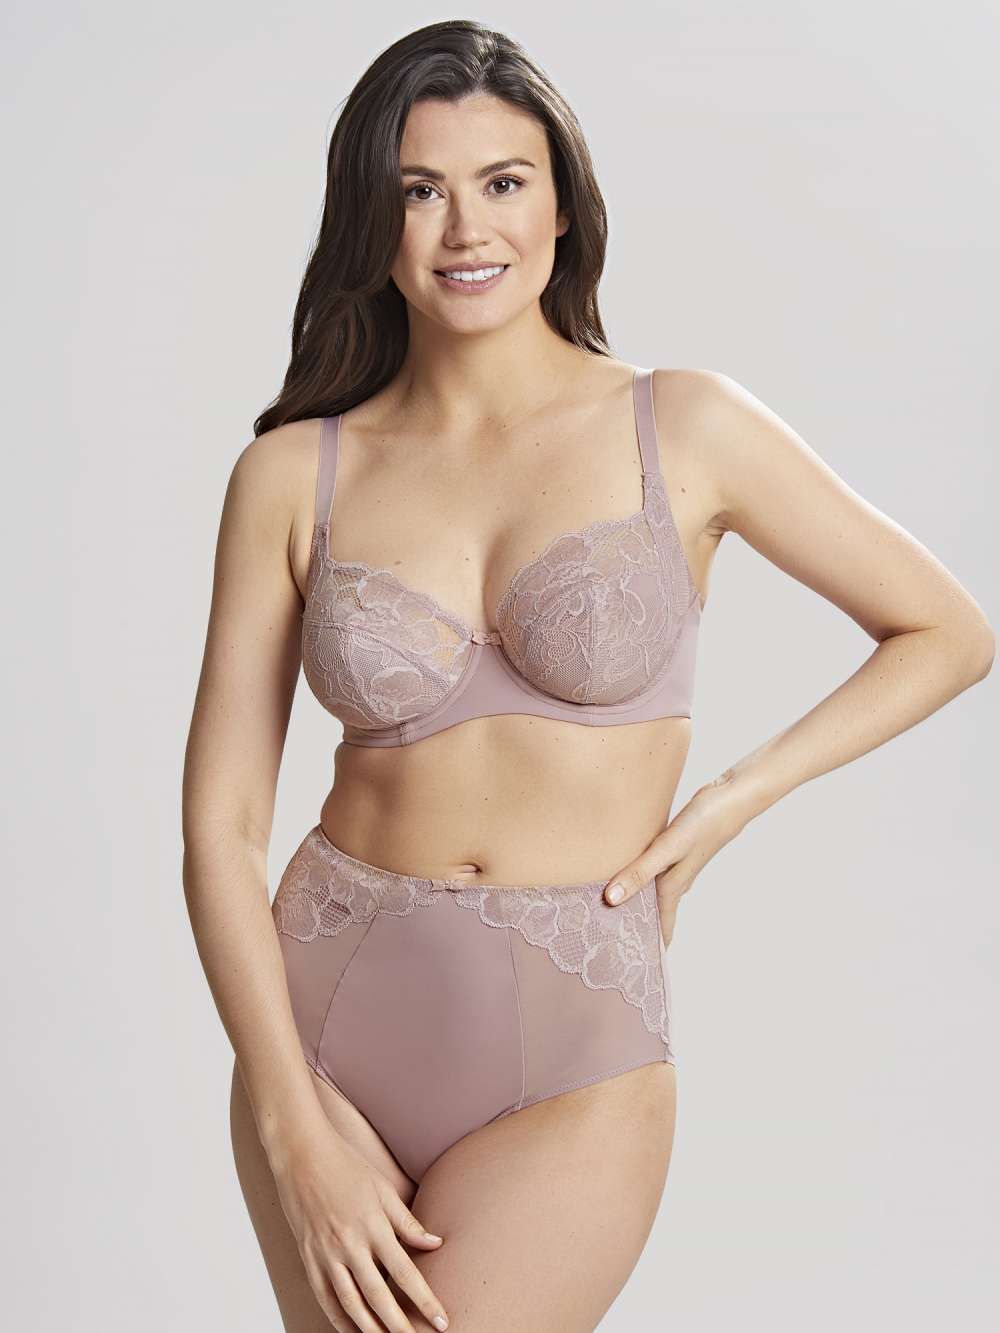 Rocha Deep Brief - Rose Dust worn by model front view